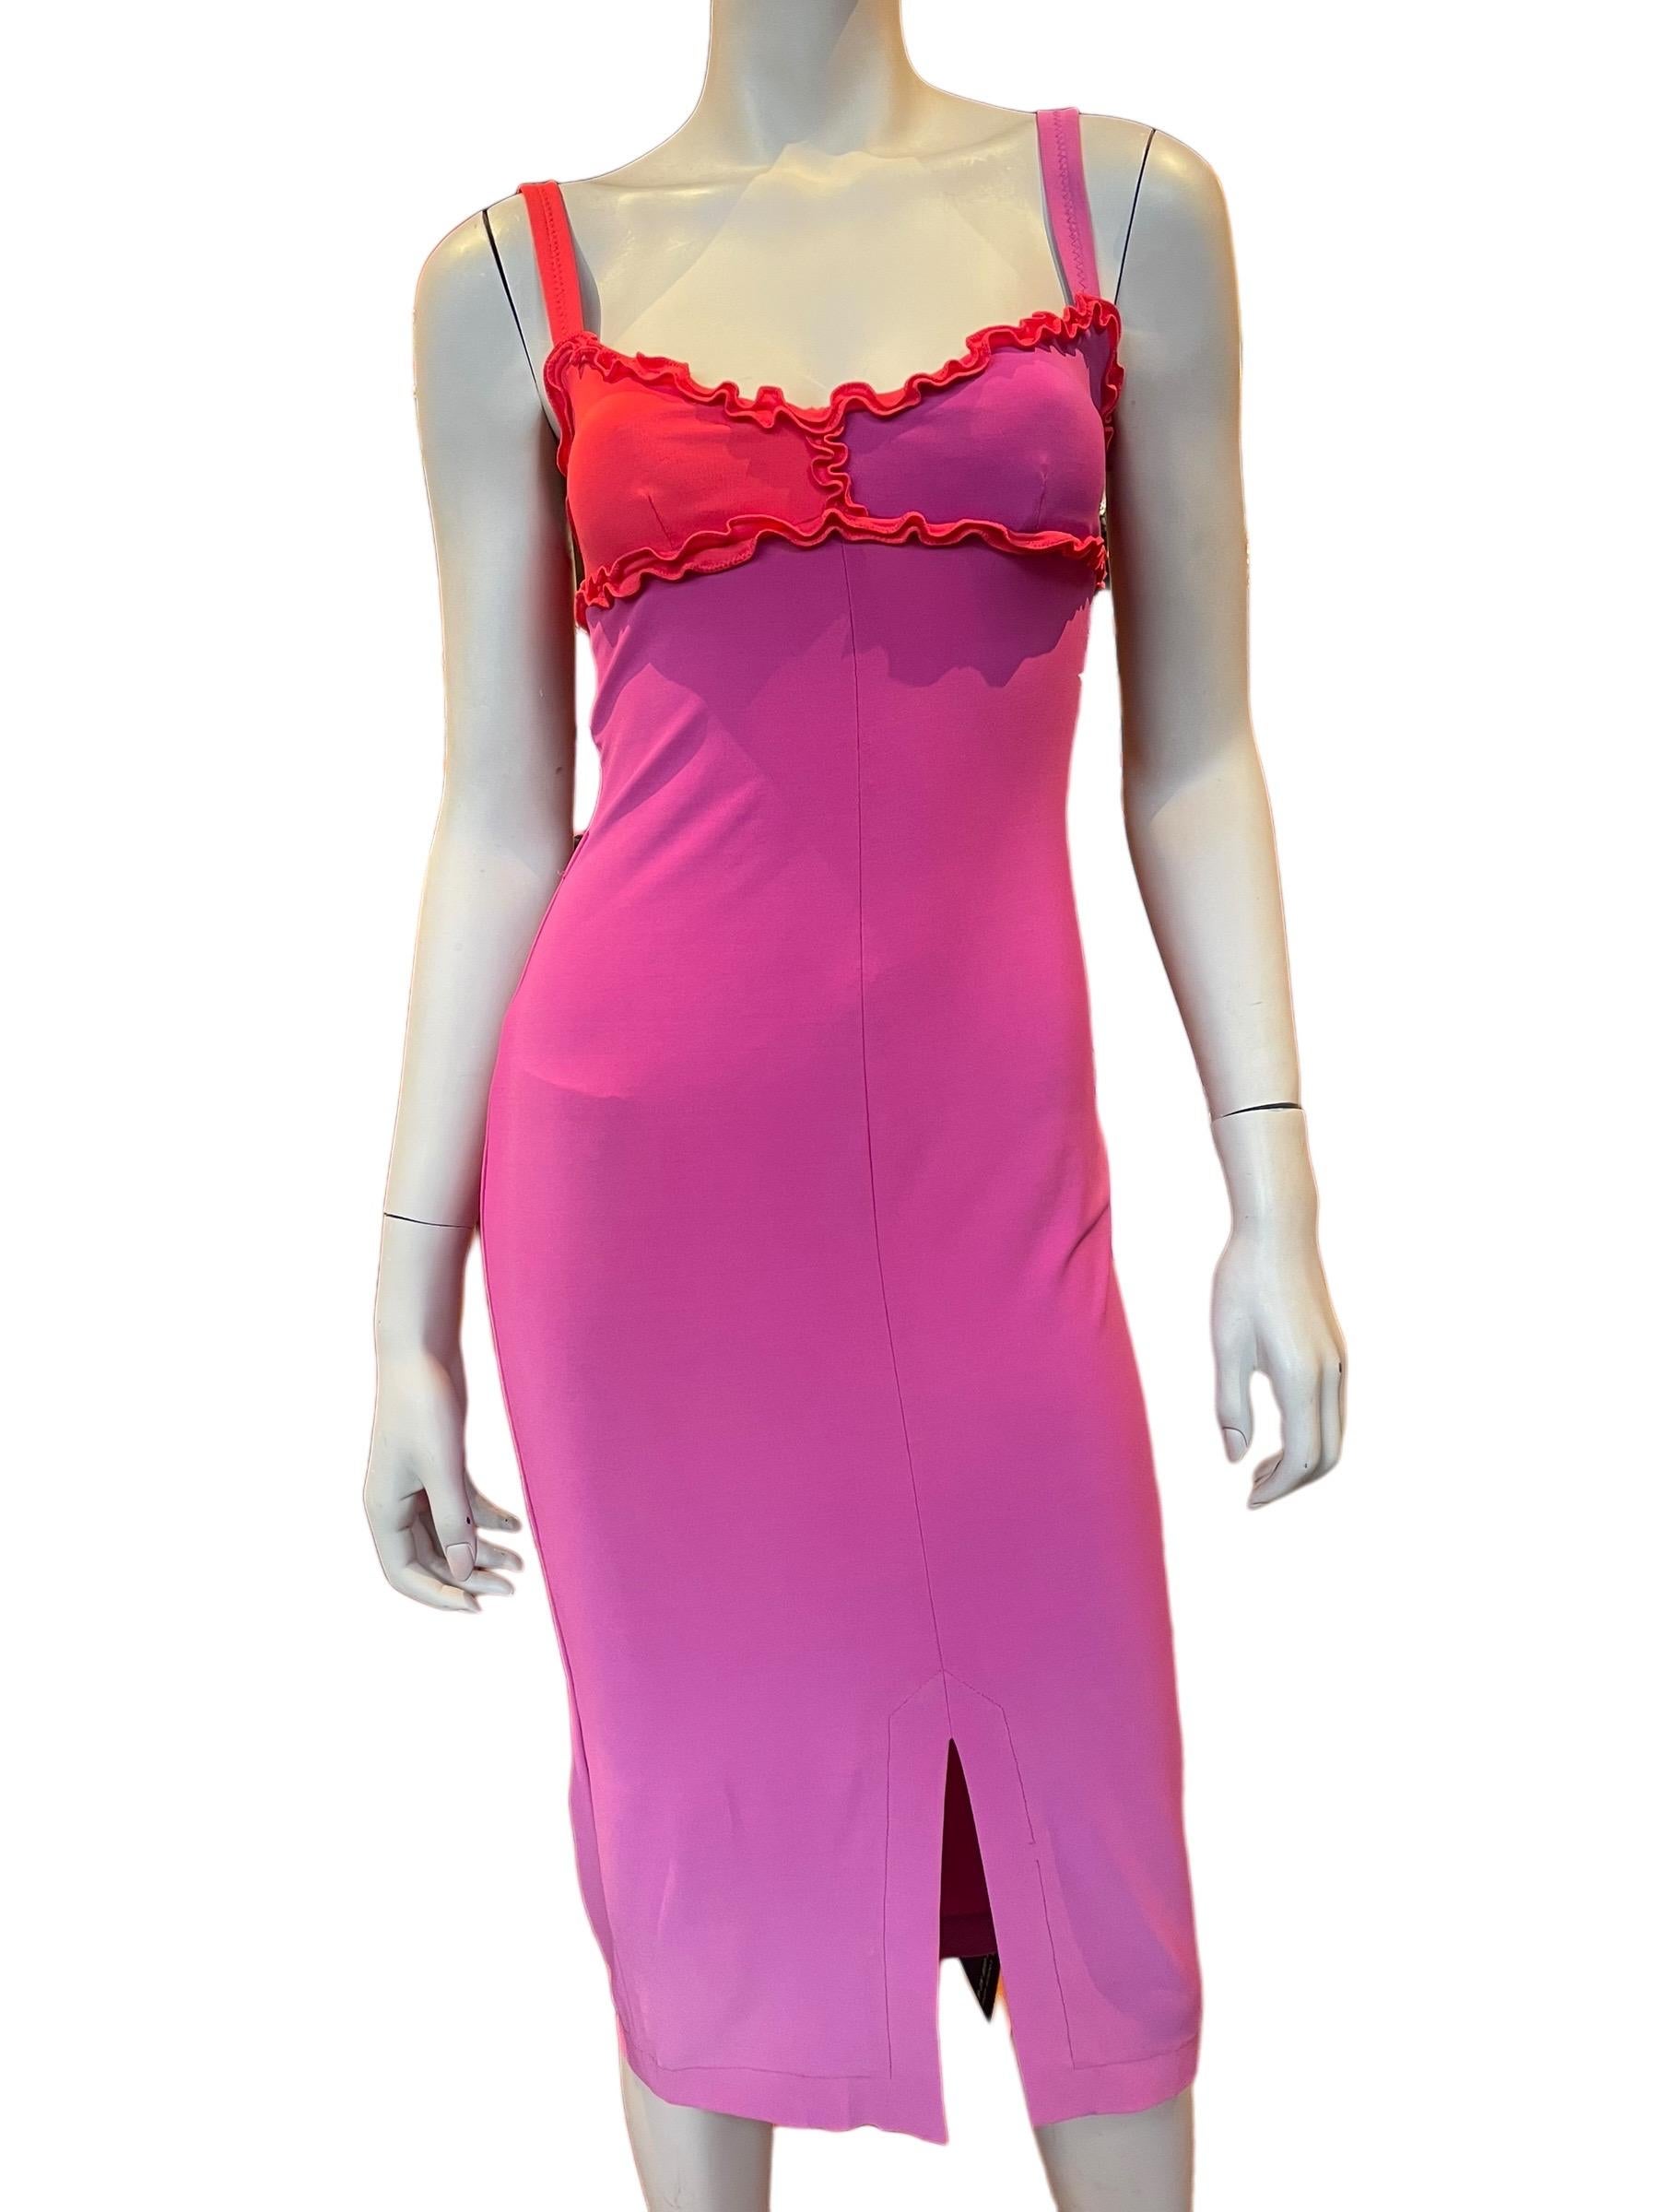 Y2K Stephen Burrows Pink Ombré and Lettuce Edge Trim Slinky Dress  In Good Condition For Sale In Greenport, NY